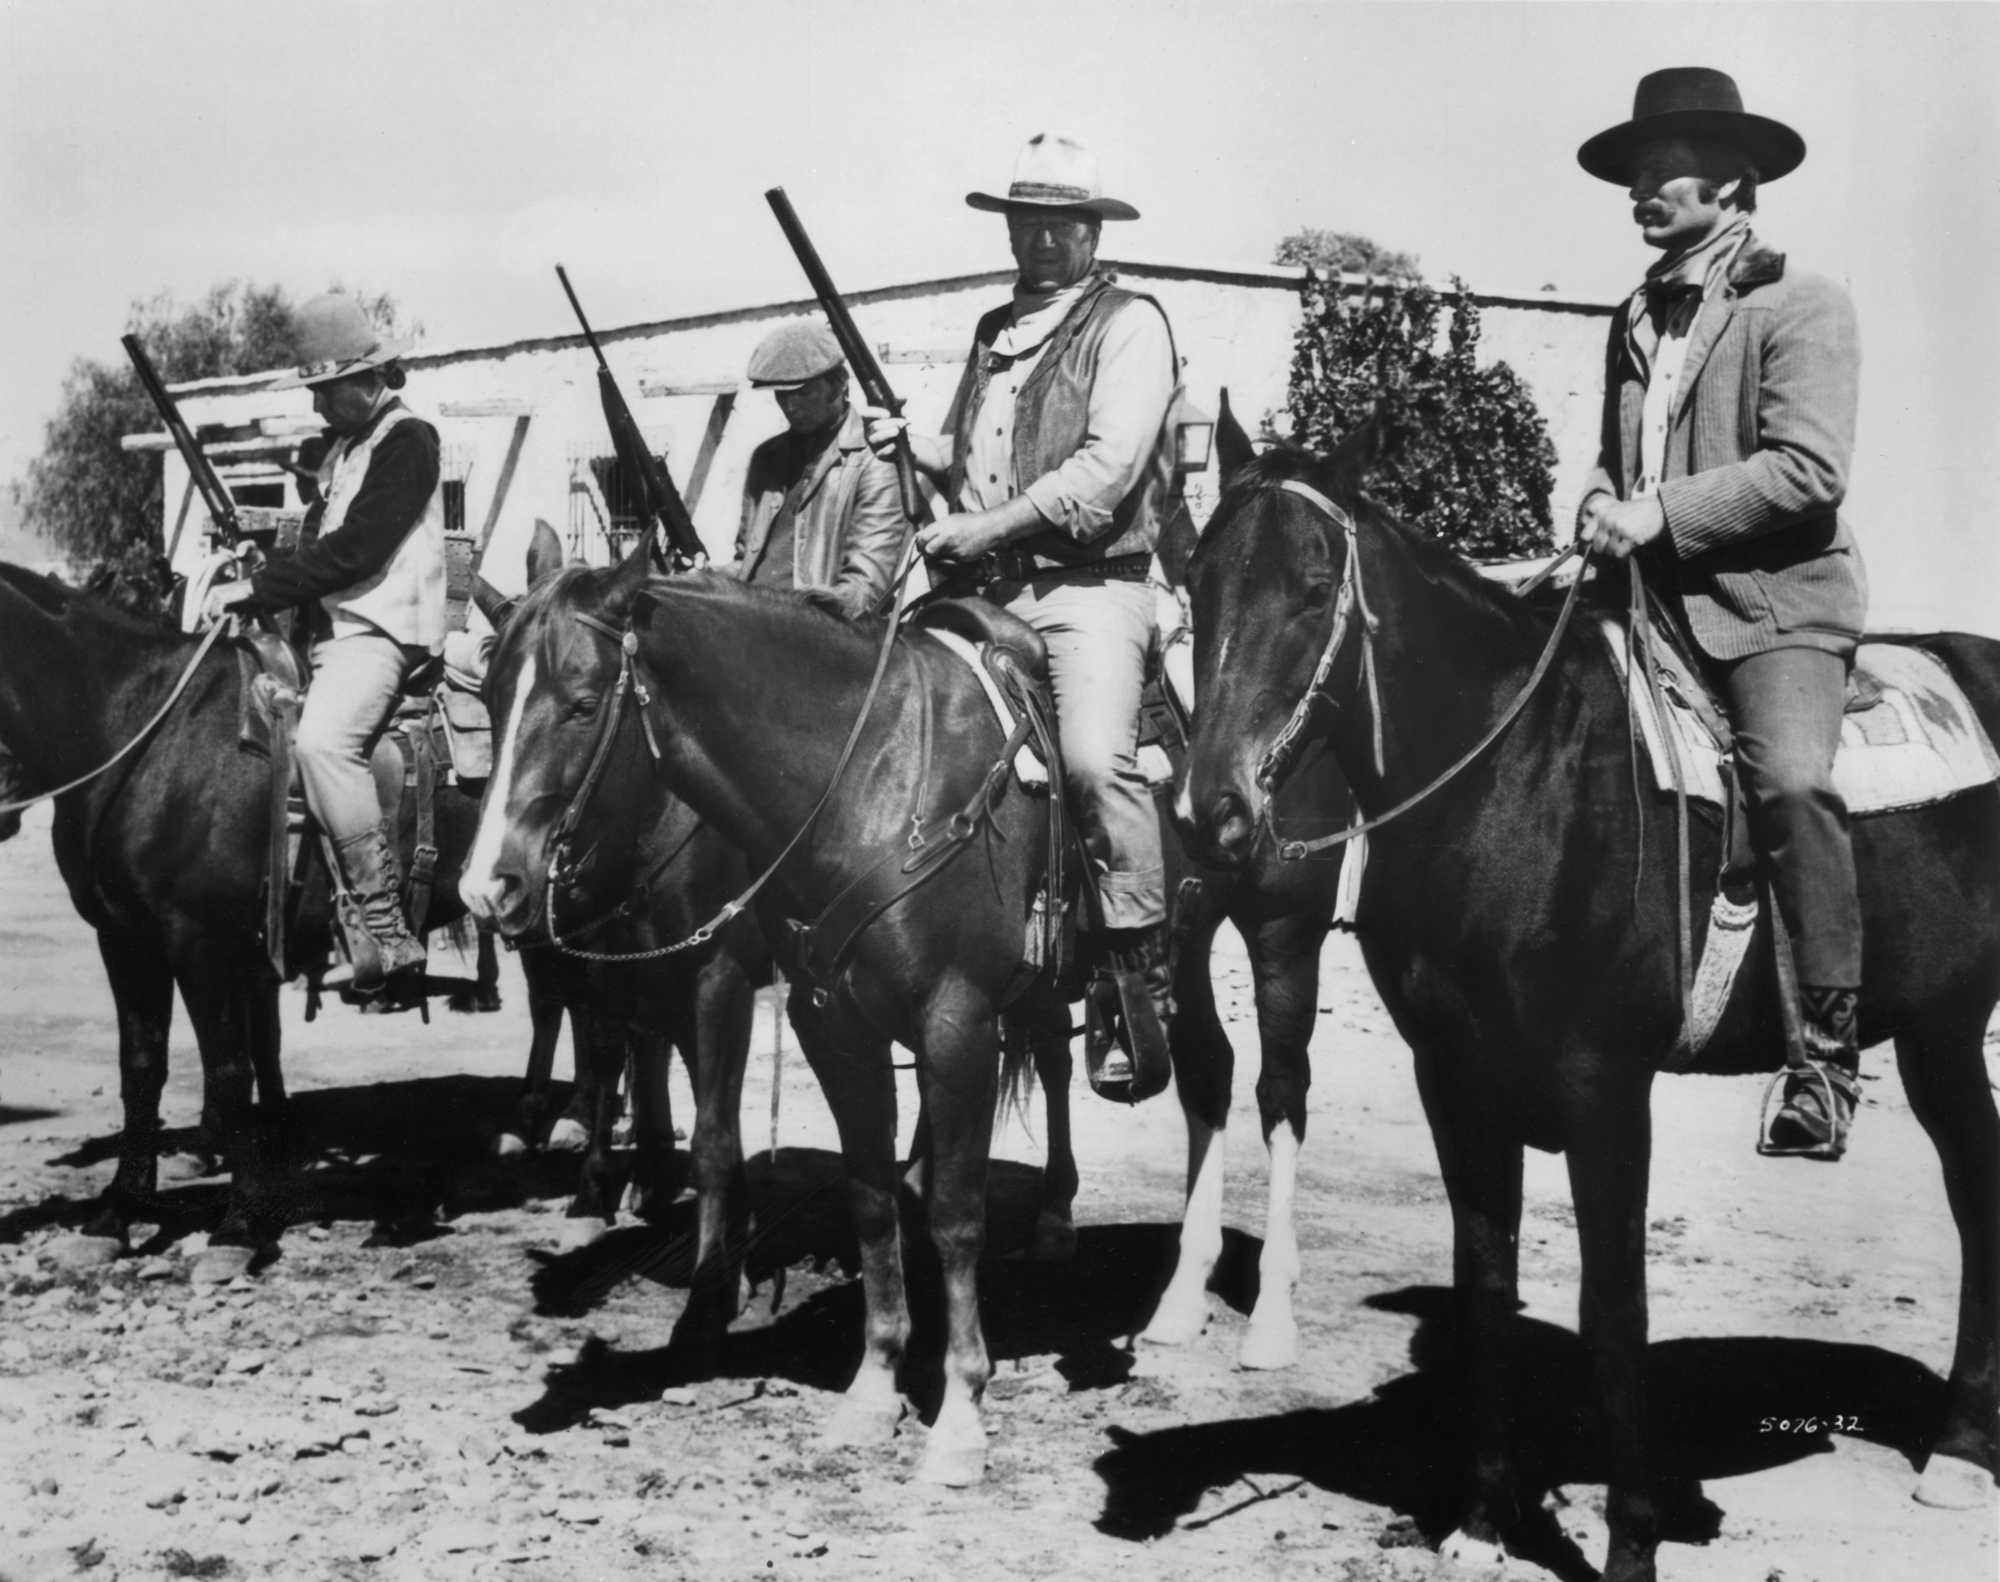 'Big Jake' Bruce Cabot as Sam Sharpnose, Christopher Mitchum as Michael McCandles, John Wayne as Jacob McCandles, and Patrick Wayne as James McCandles on their horses, holding guns in front of a shack.